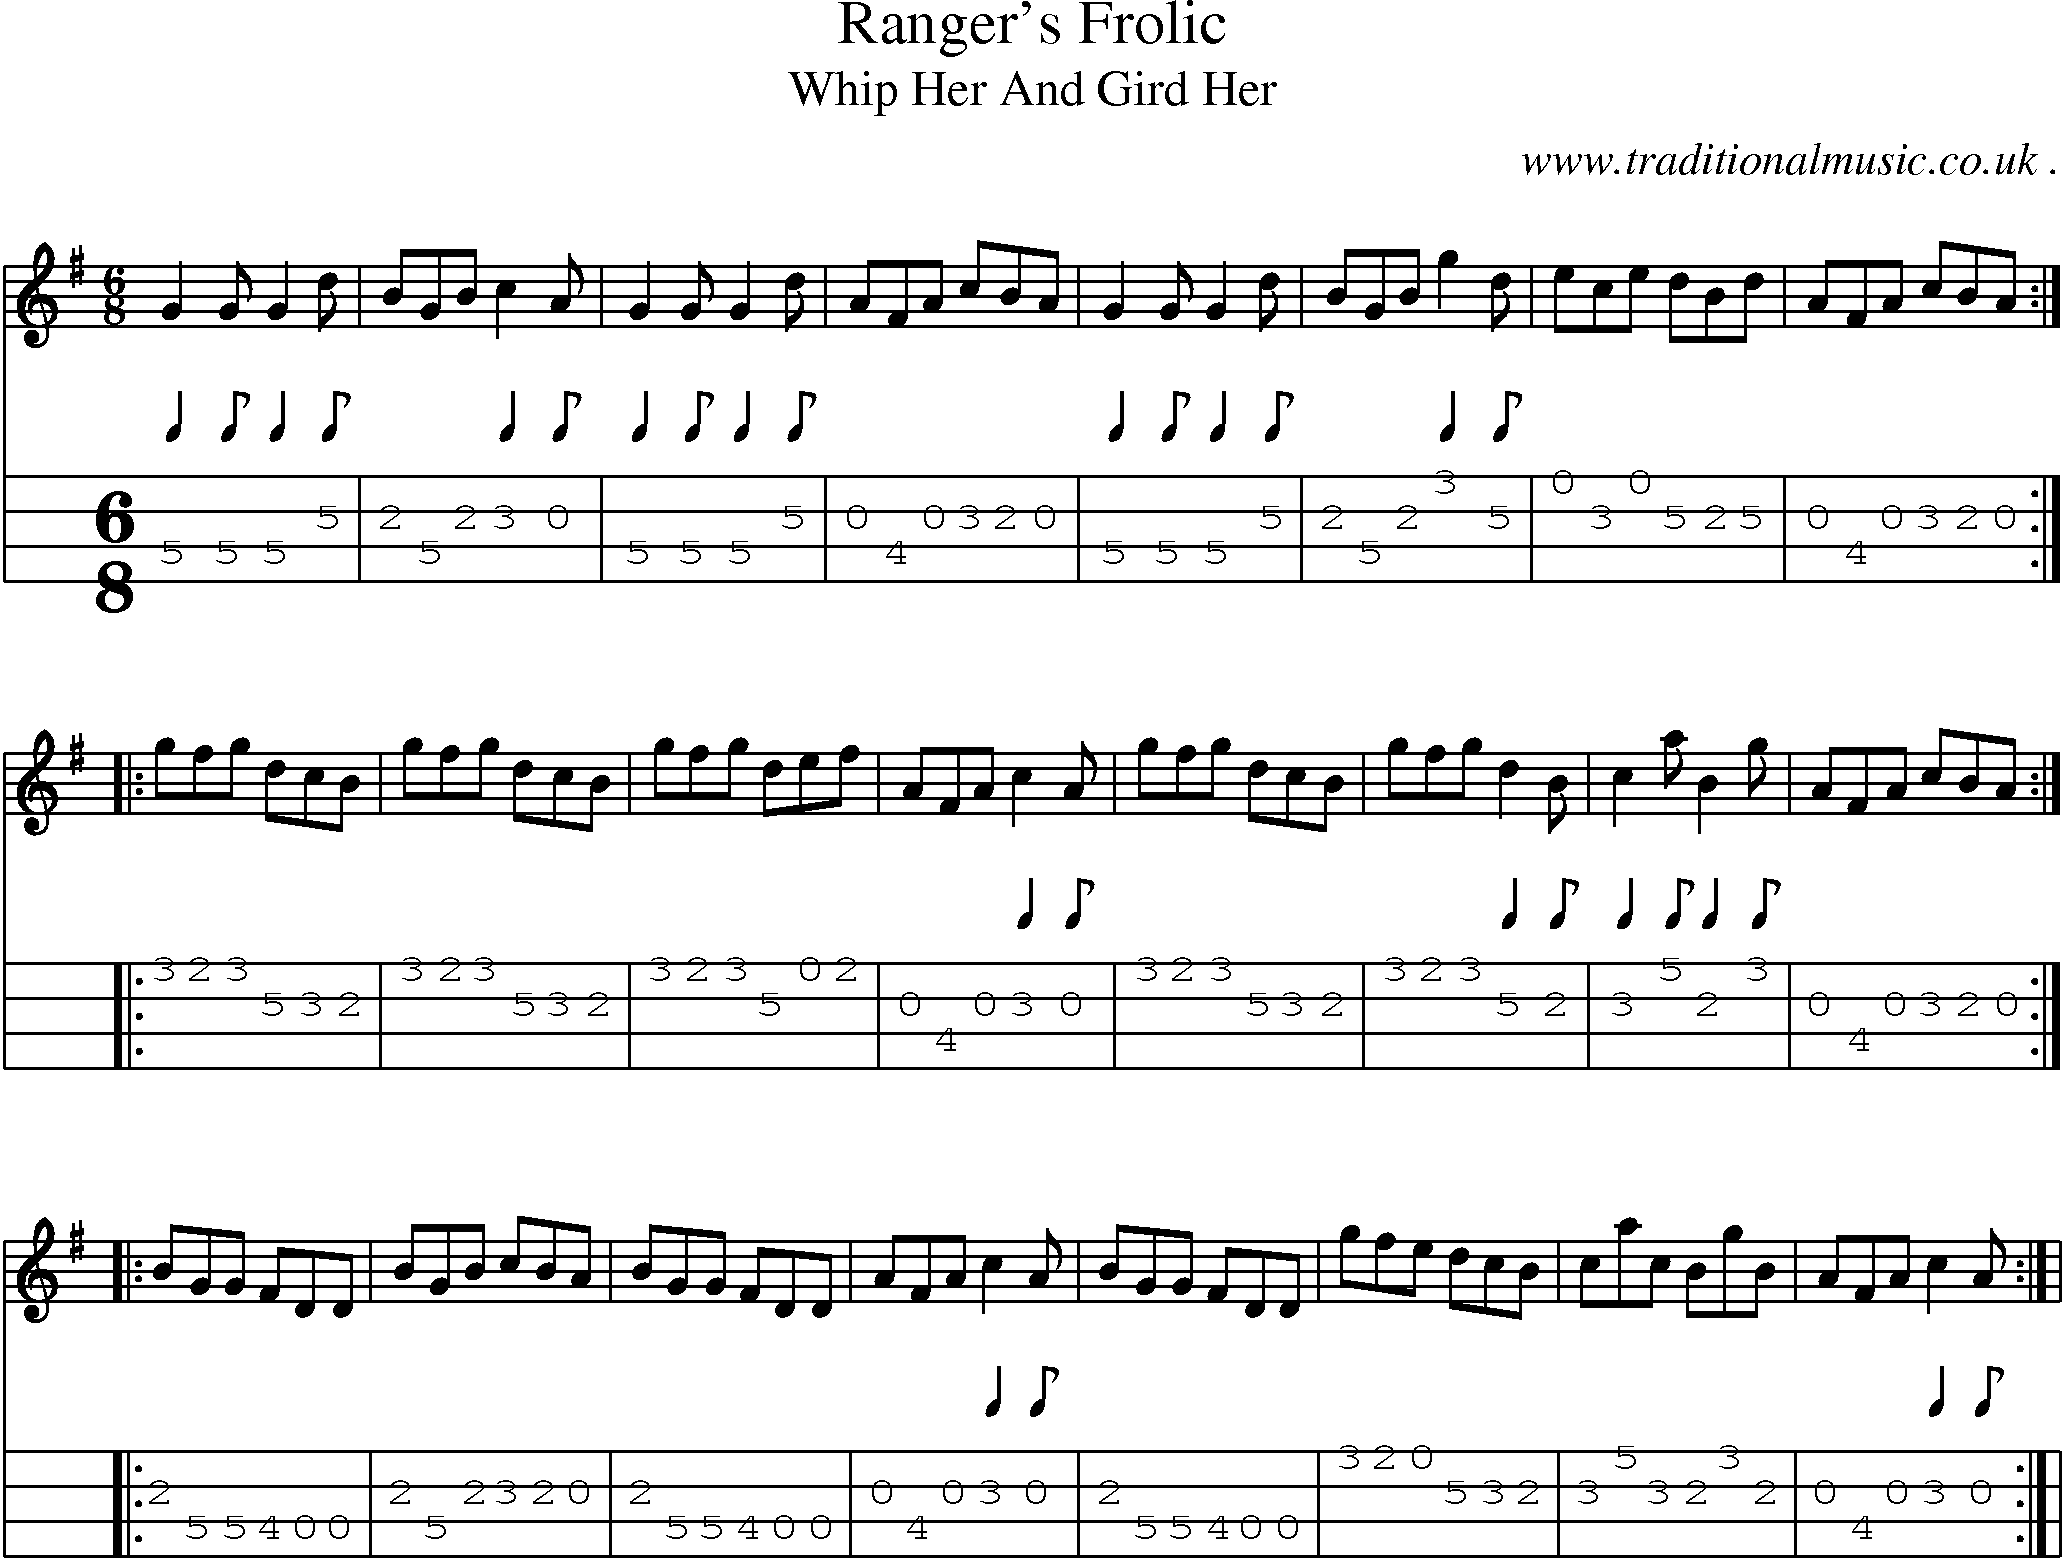 Sheet-Music and Mandolin Tabs for Rangers Frolic